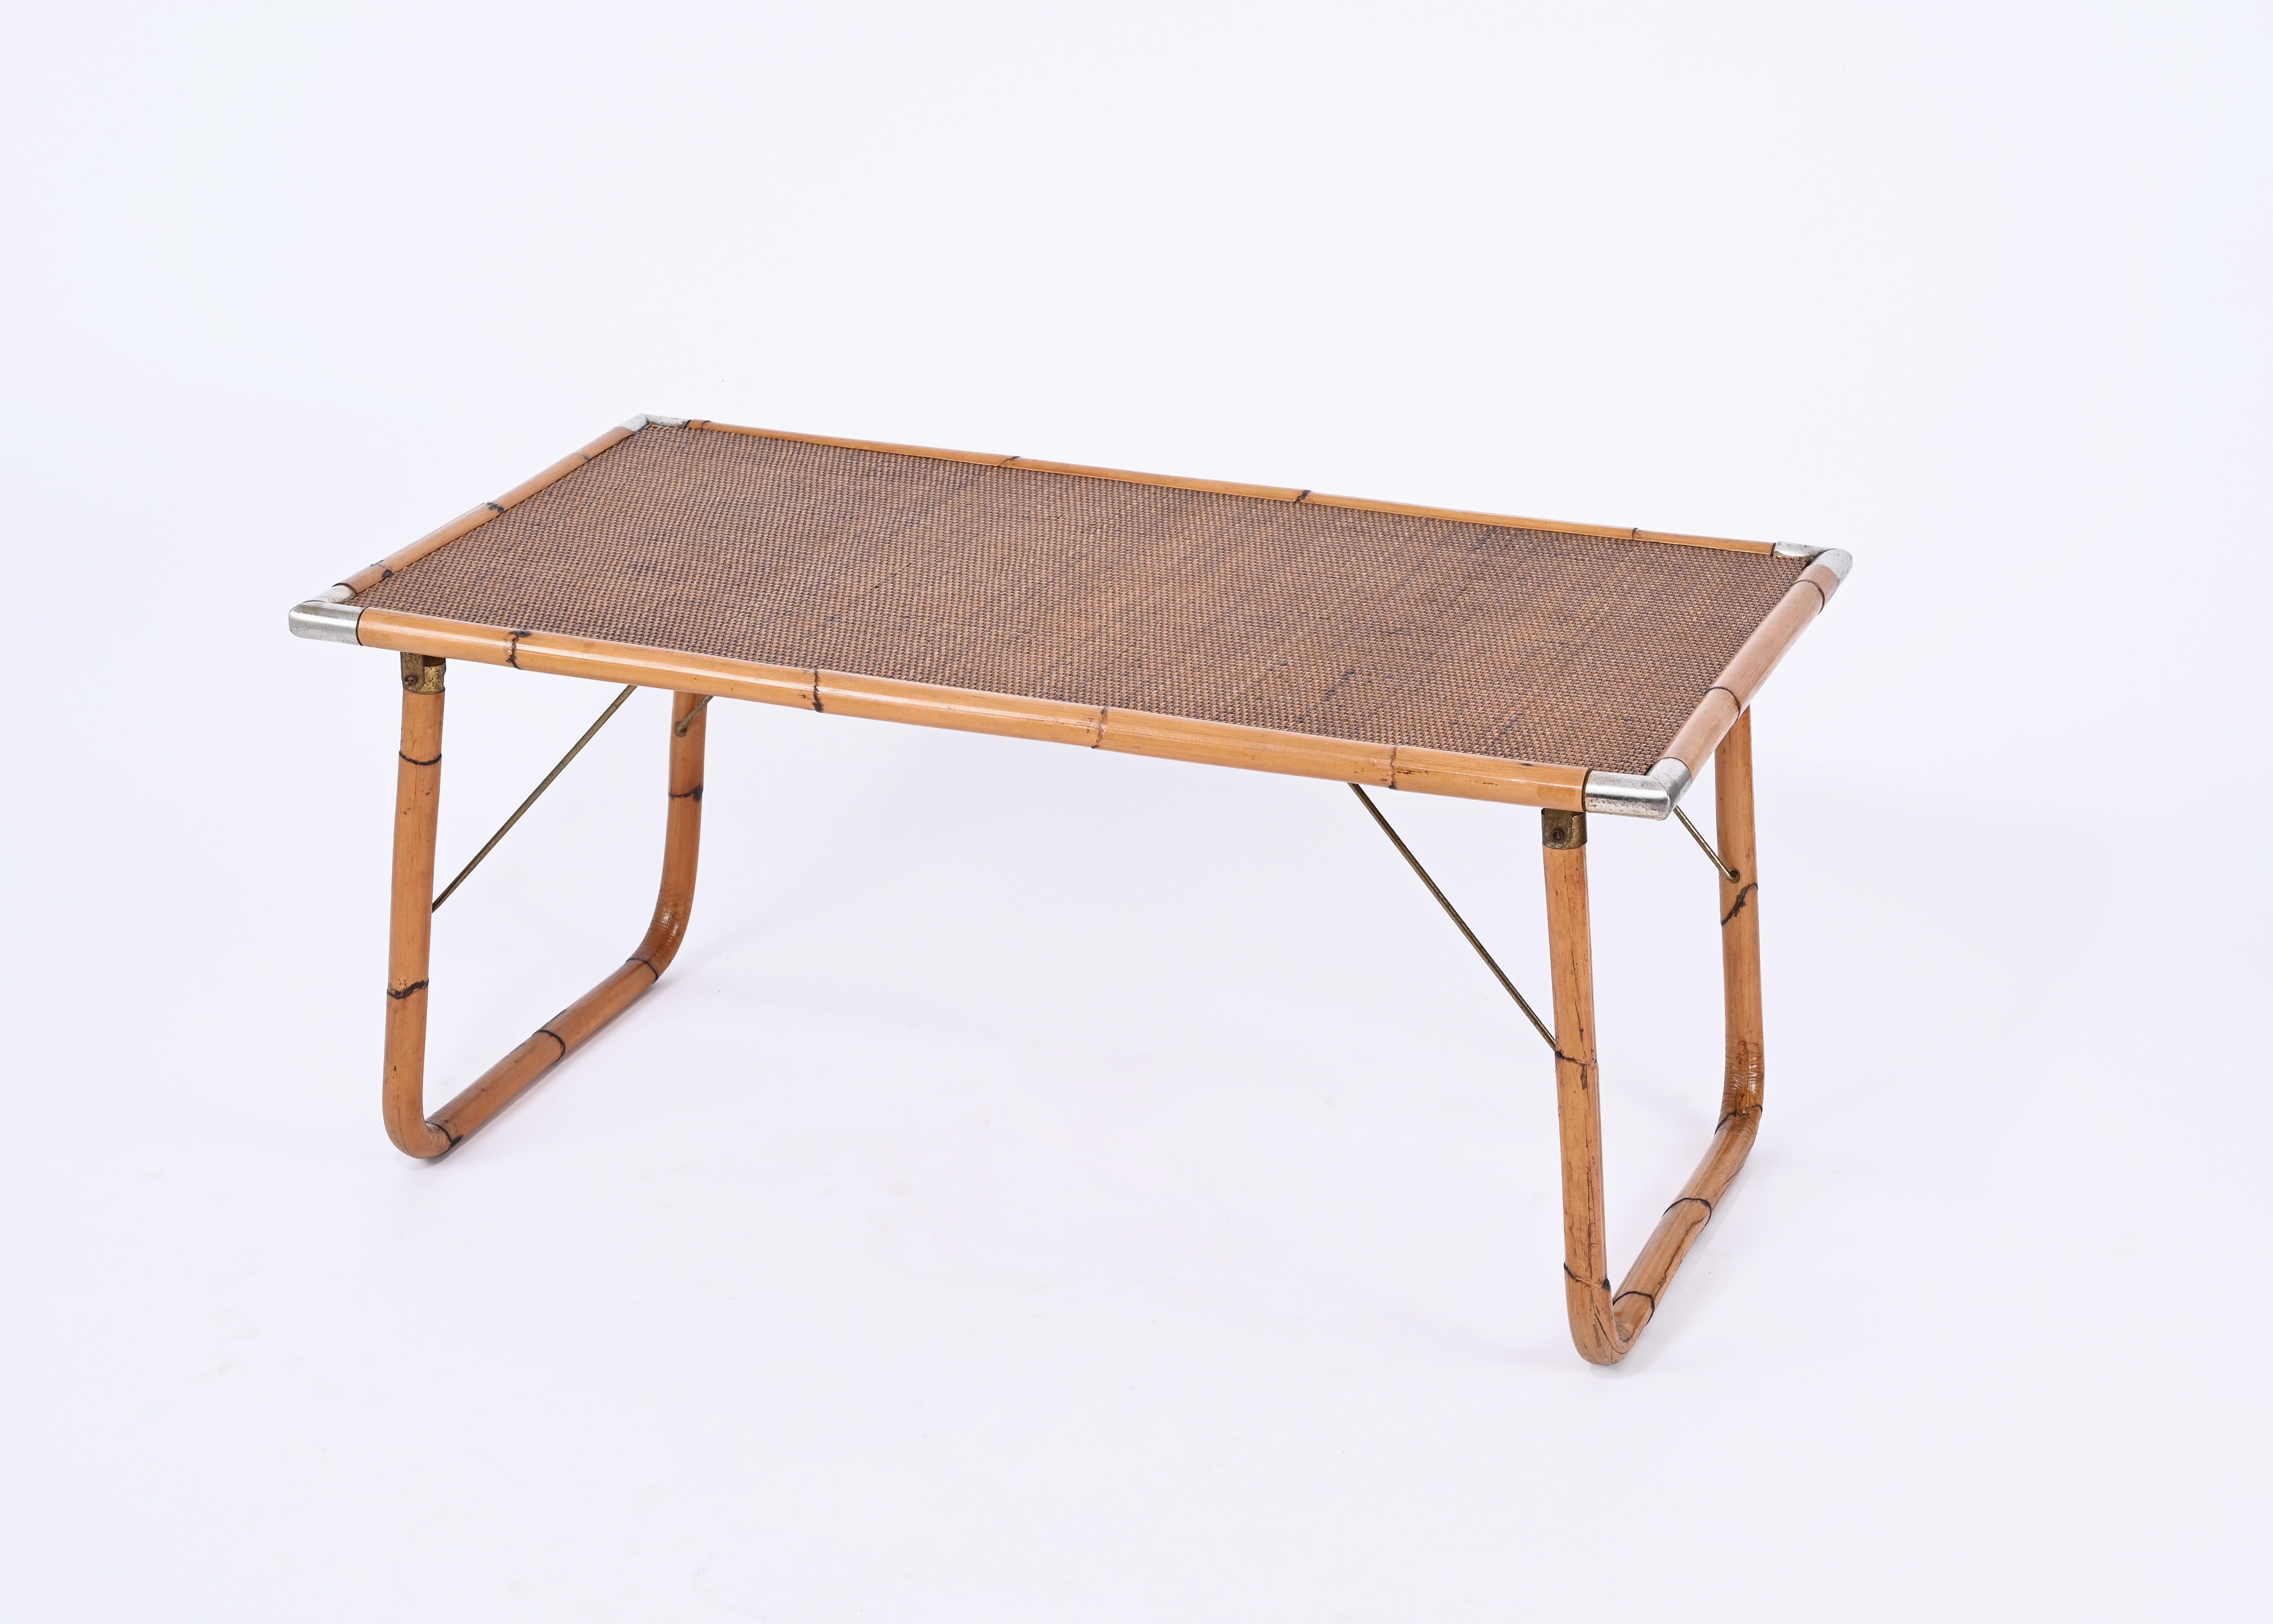 Stunning midcentury foldable coffee table in bamboo cane and wicker with polished metal corners.  This coffee table was designed in Italy in the 1960s.

This lovely piece is fantastic as it is very solid and eclectic, it can be easily folded and